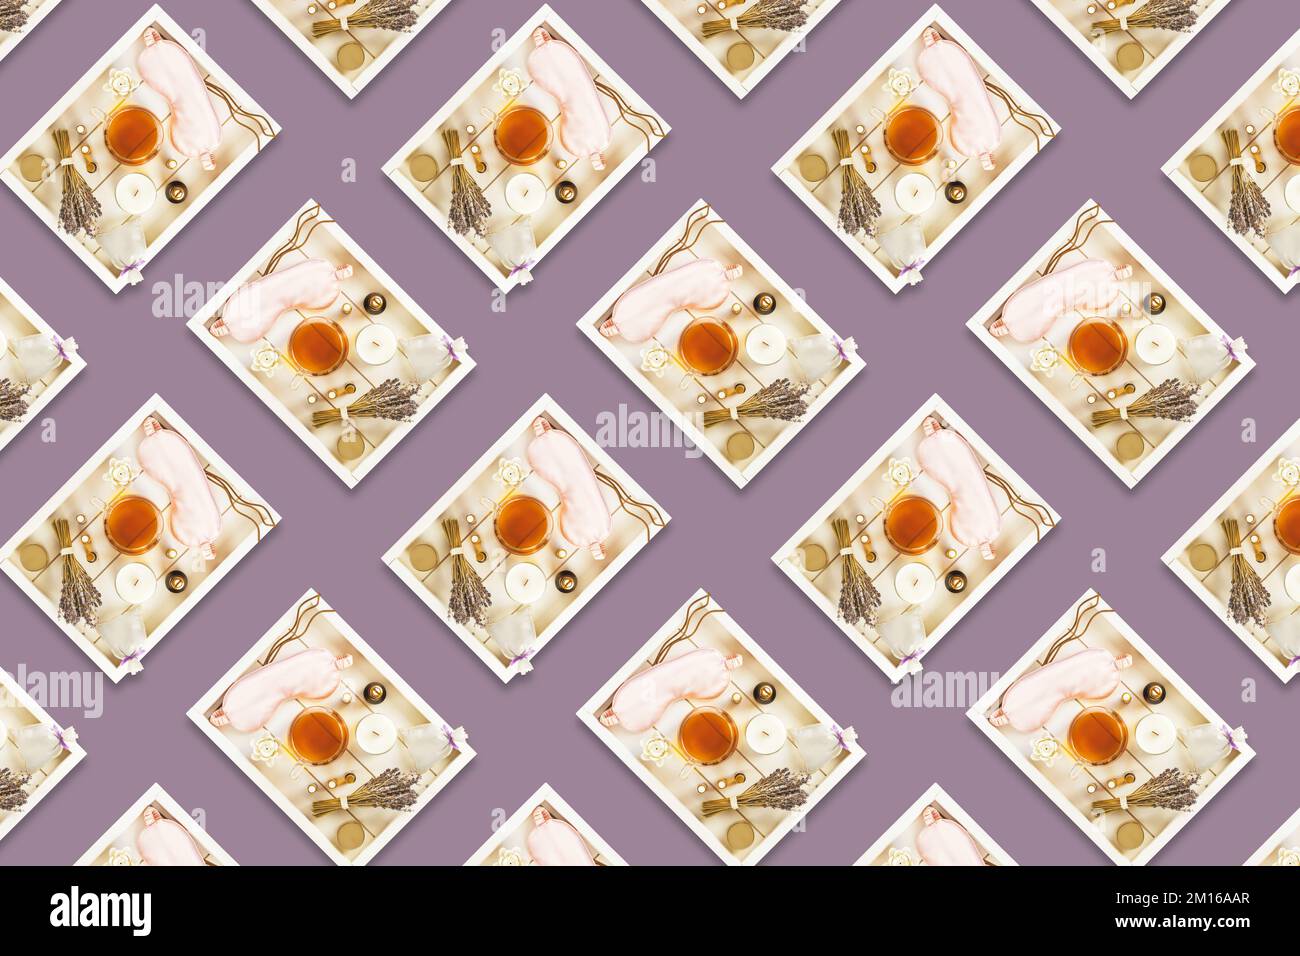 Sleep care seamless pattern. Relax at home background. Cup of herbal tea, aroma candle, sticks, lavender flowers, dry oranges and natural oils on wood Stock Photo